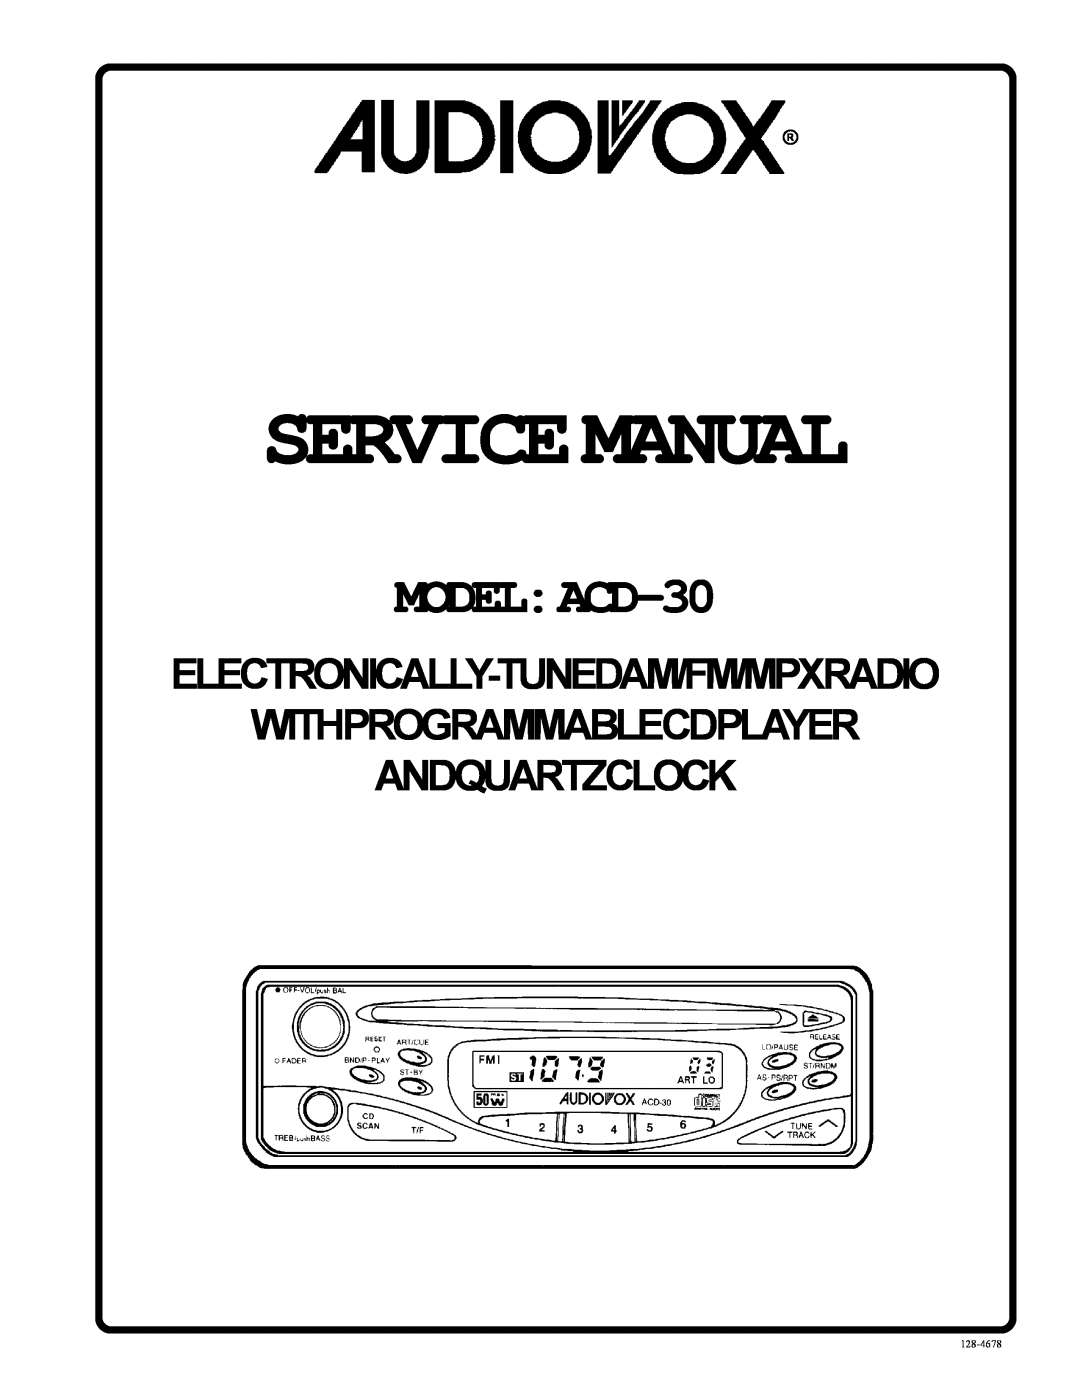 Audiovox service manual MODEL ACD-30, Electronically-Tunedam/Fm/Mpxradio, Withprogrammablecdplayer Andquartzclock 